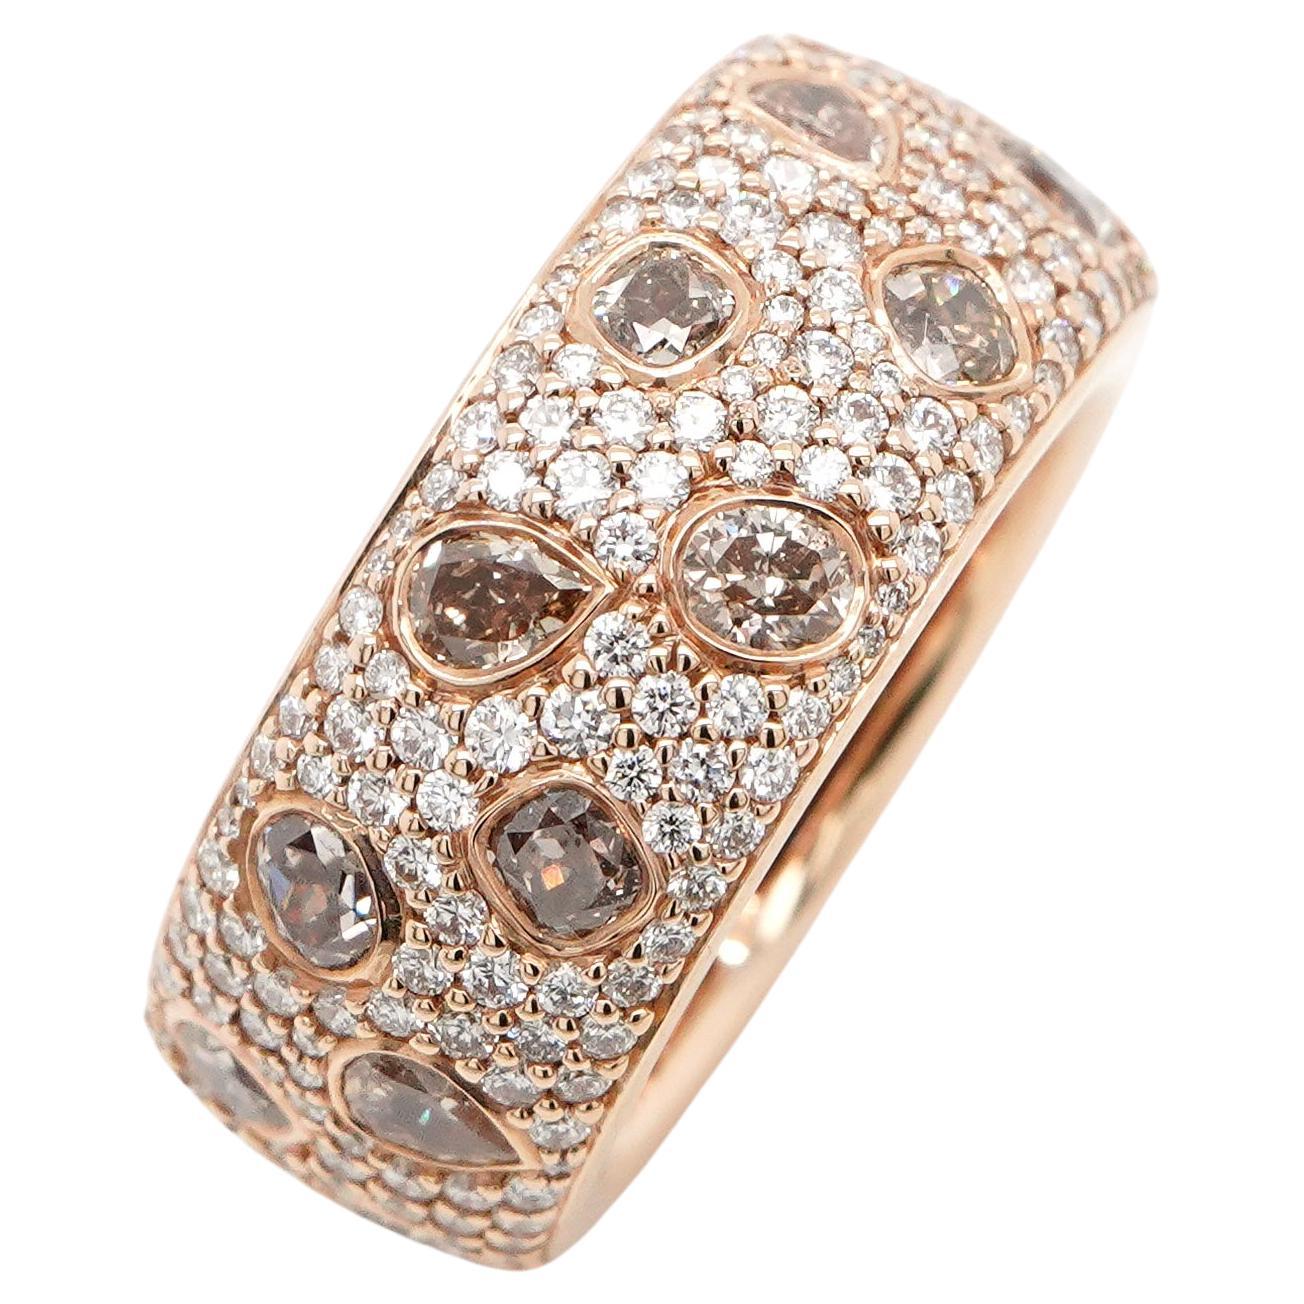 BENJAMIN FINE JEWELRY 2.54 cts Mixed Fancy Brown Diamond 18K Ring For Sale